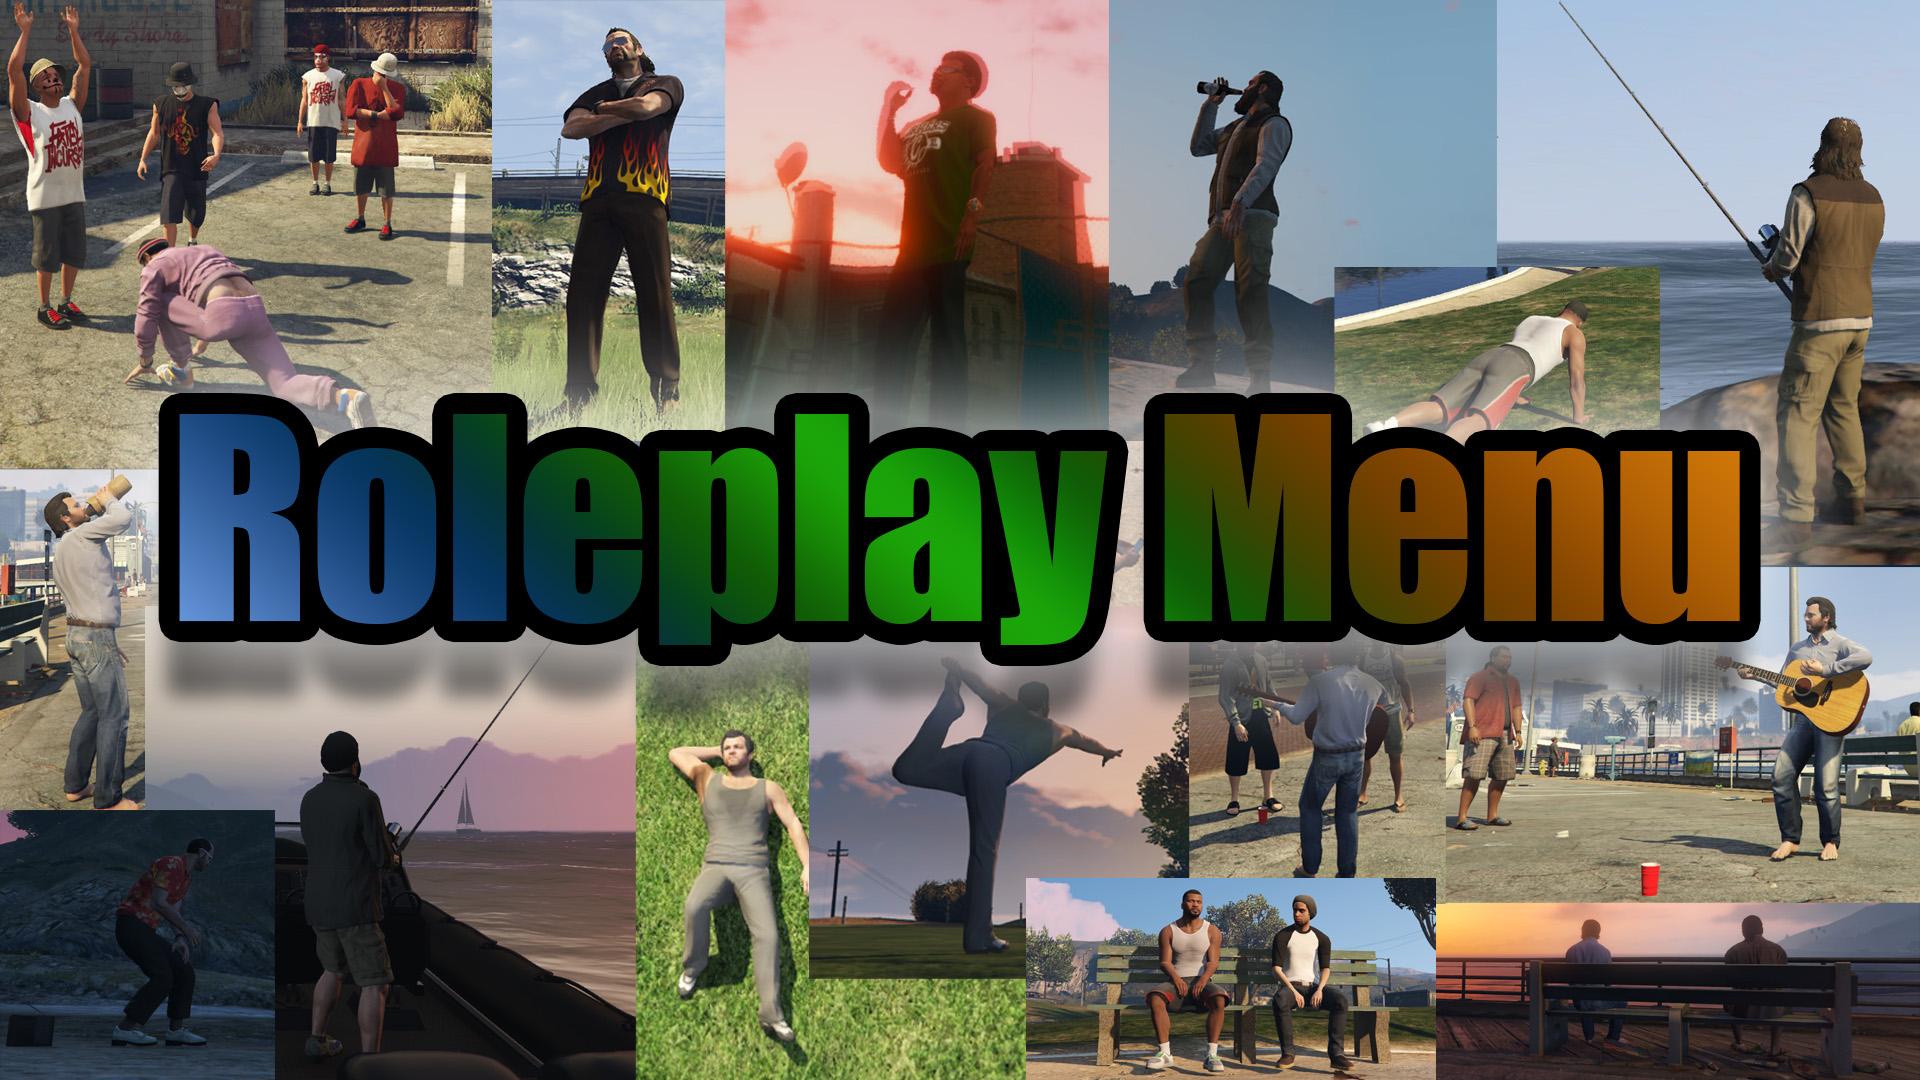 5 best roleplay mods for GTA 5 in 2022